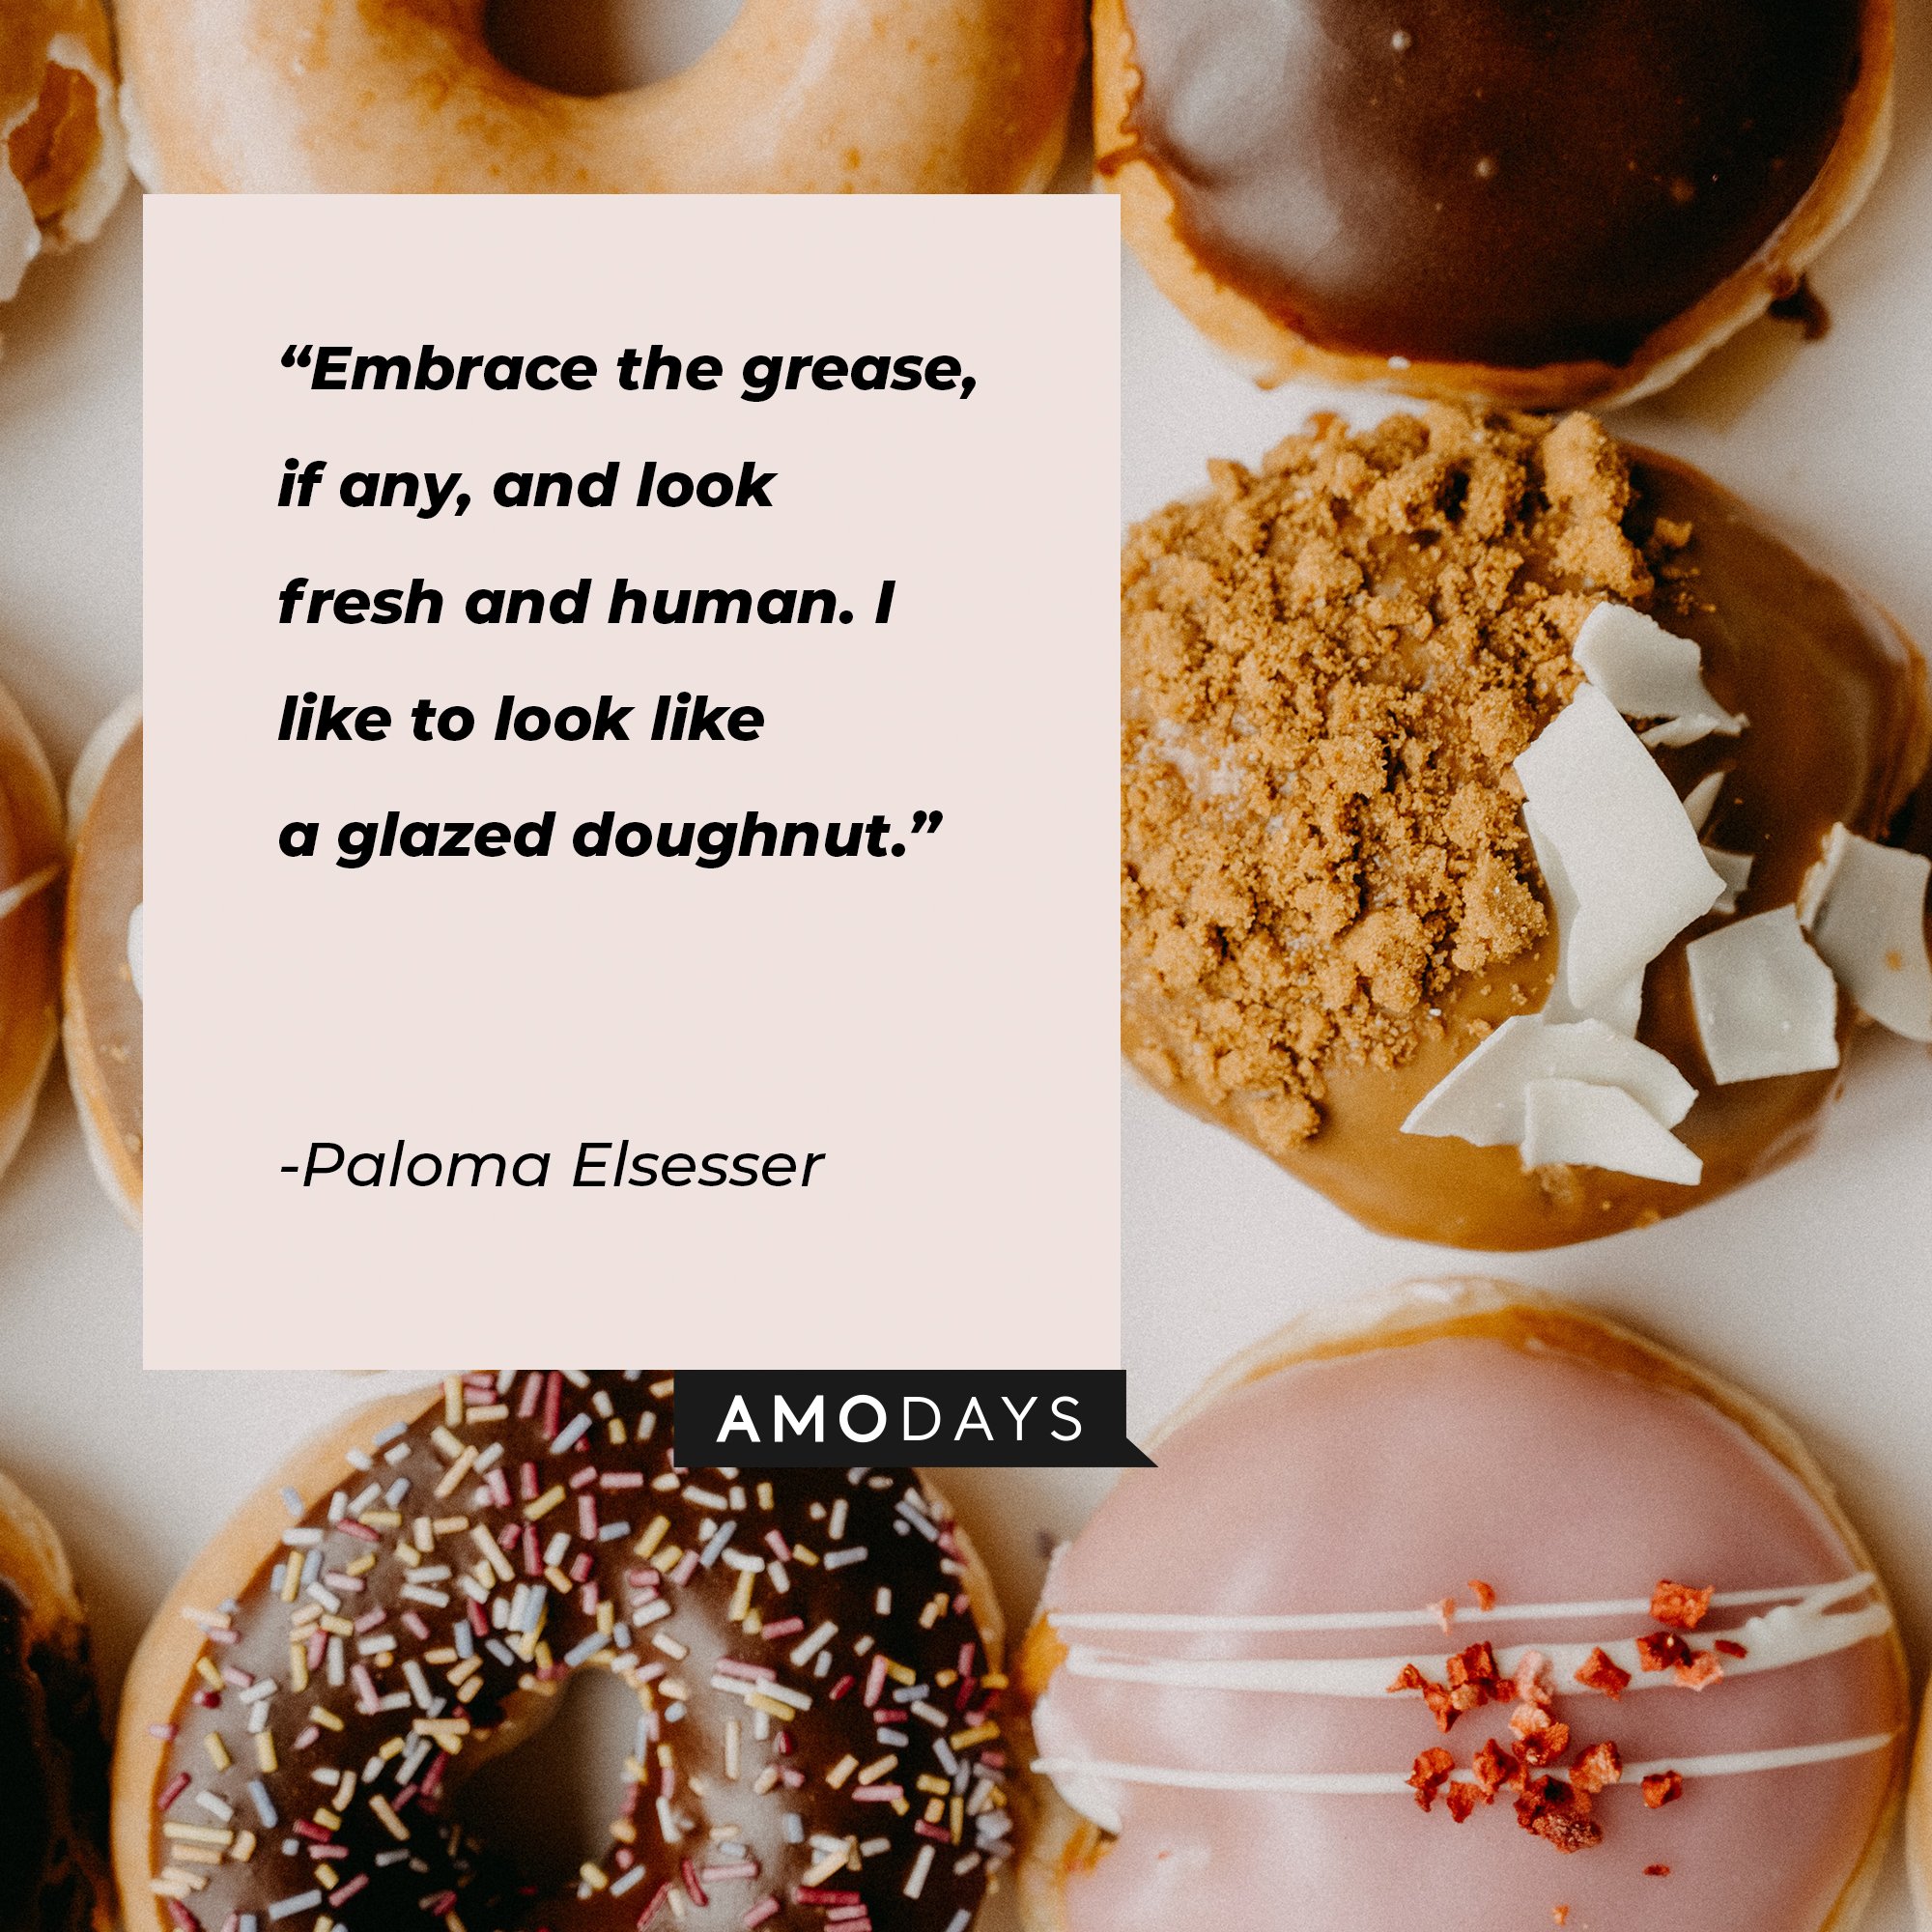 Paloma Elsesser's quote: "Embrace the grease, if any, and look fresh and human. I like to look like a glazed doughnut." | Image: AmoDays